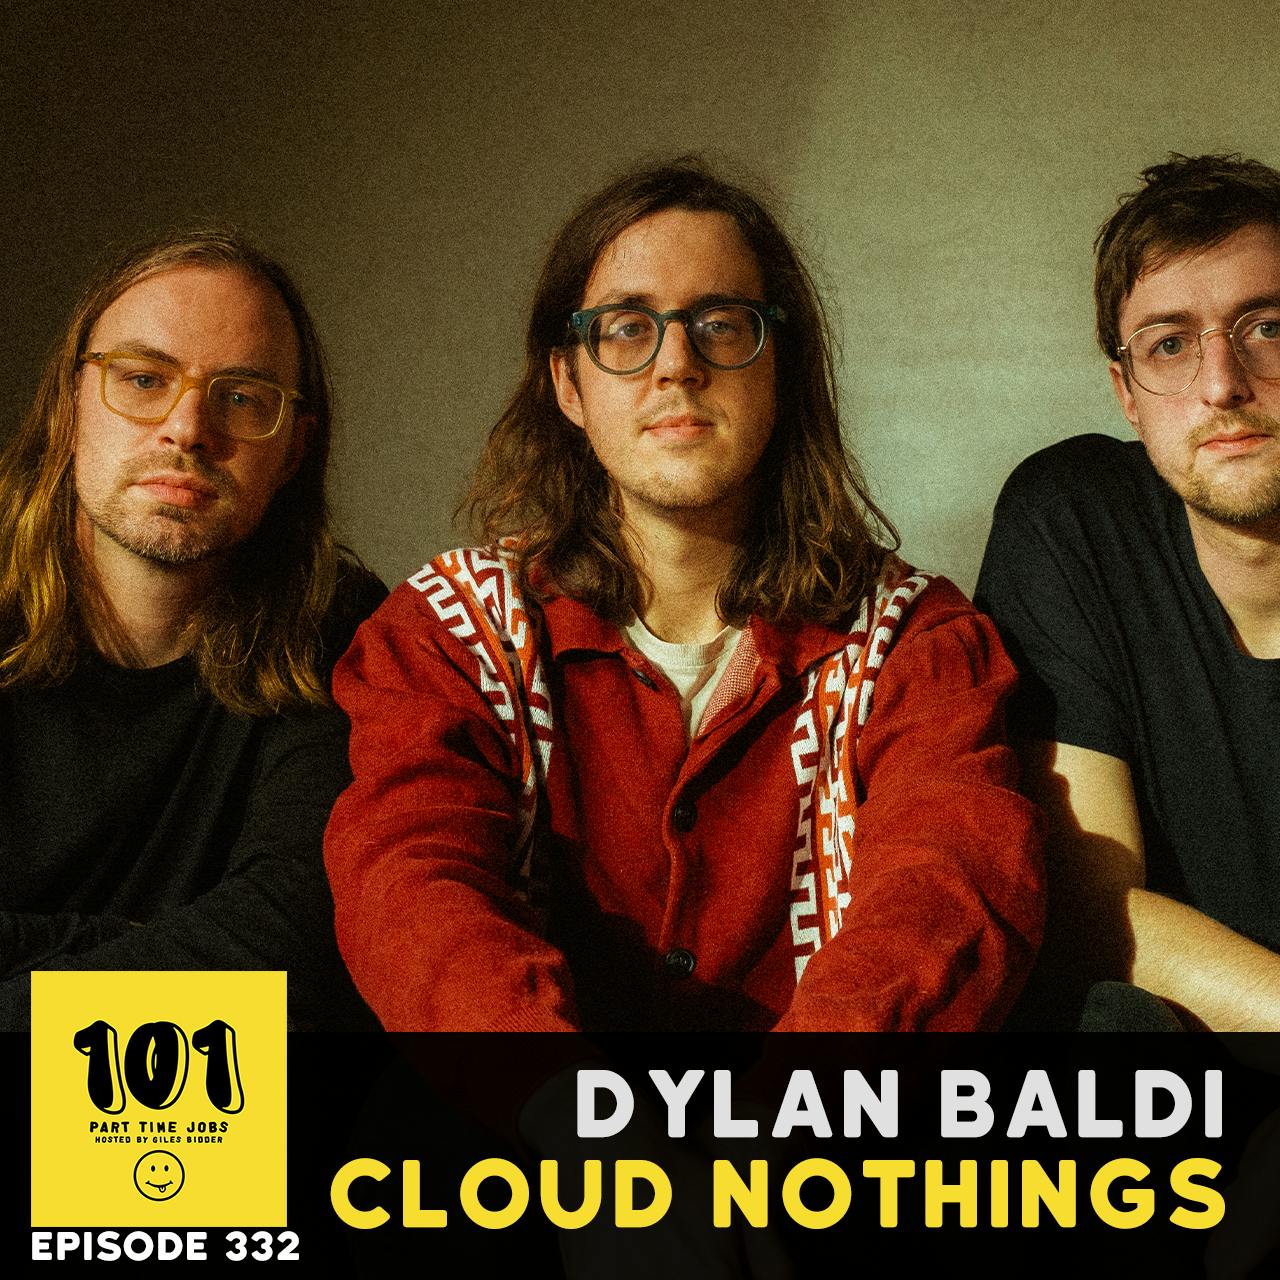 Dylan Baldi (Cloud Nothings) - ”A marathon in every state”